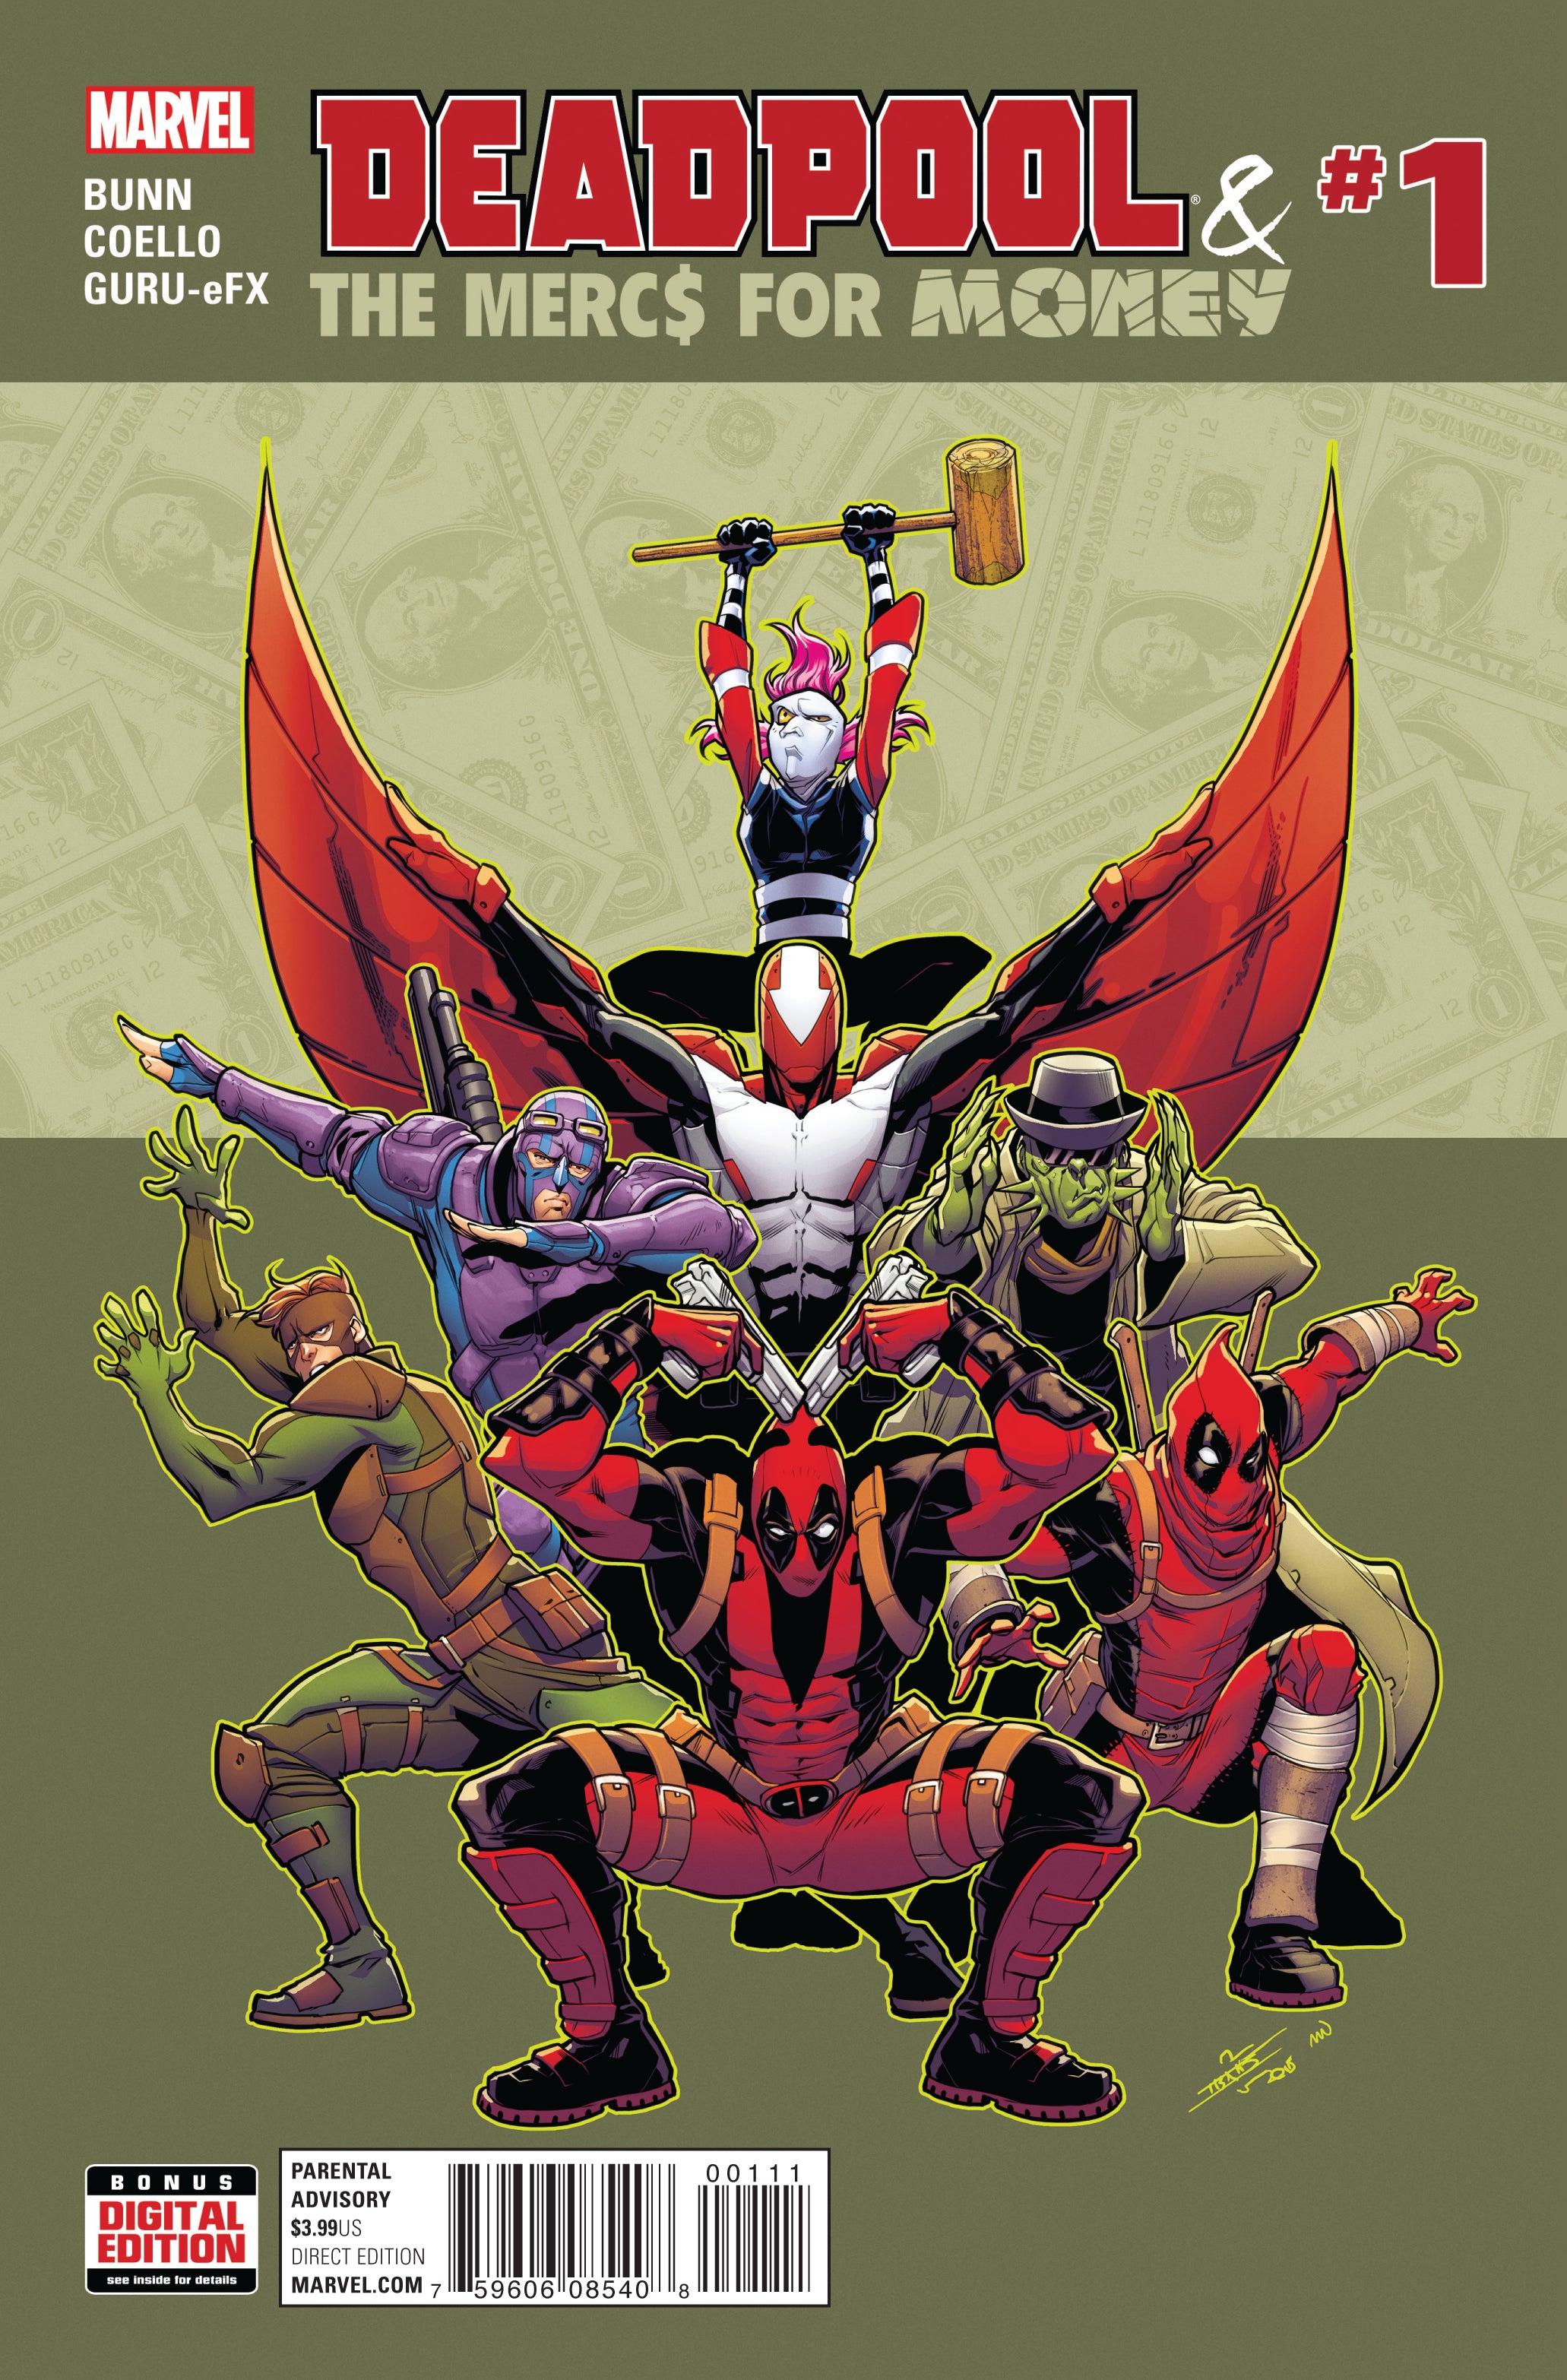 DEADPOOL AND MERCS FOR MONEY #1 to #10 | Game Master's Emporium (The New GME)